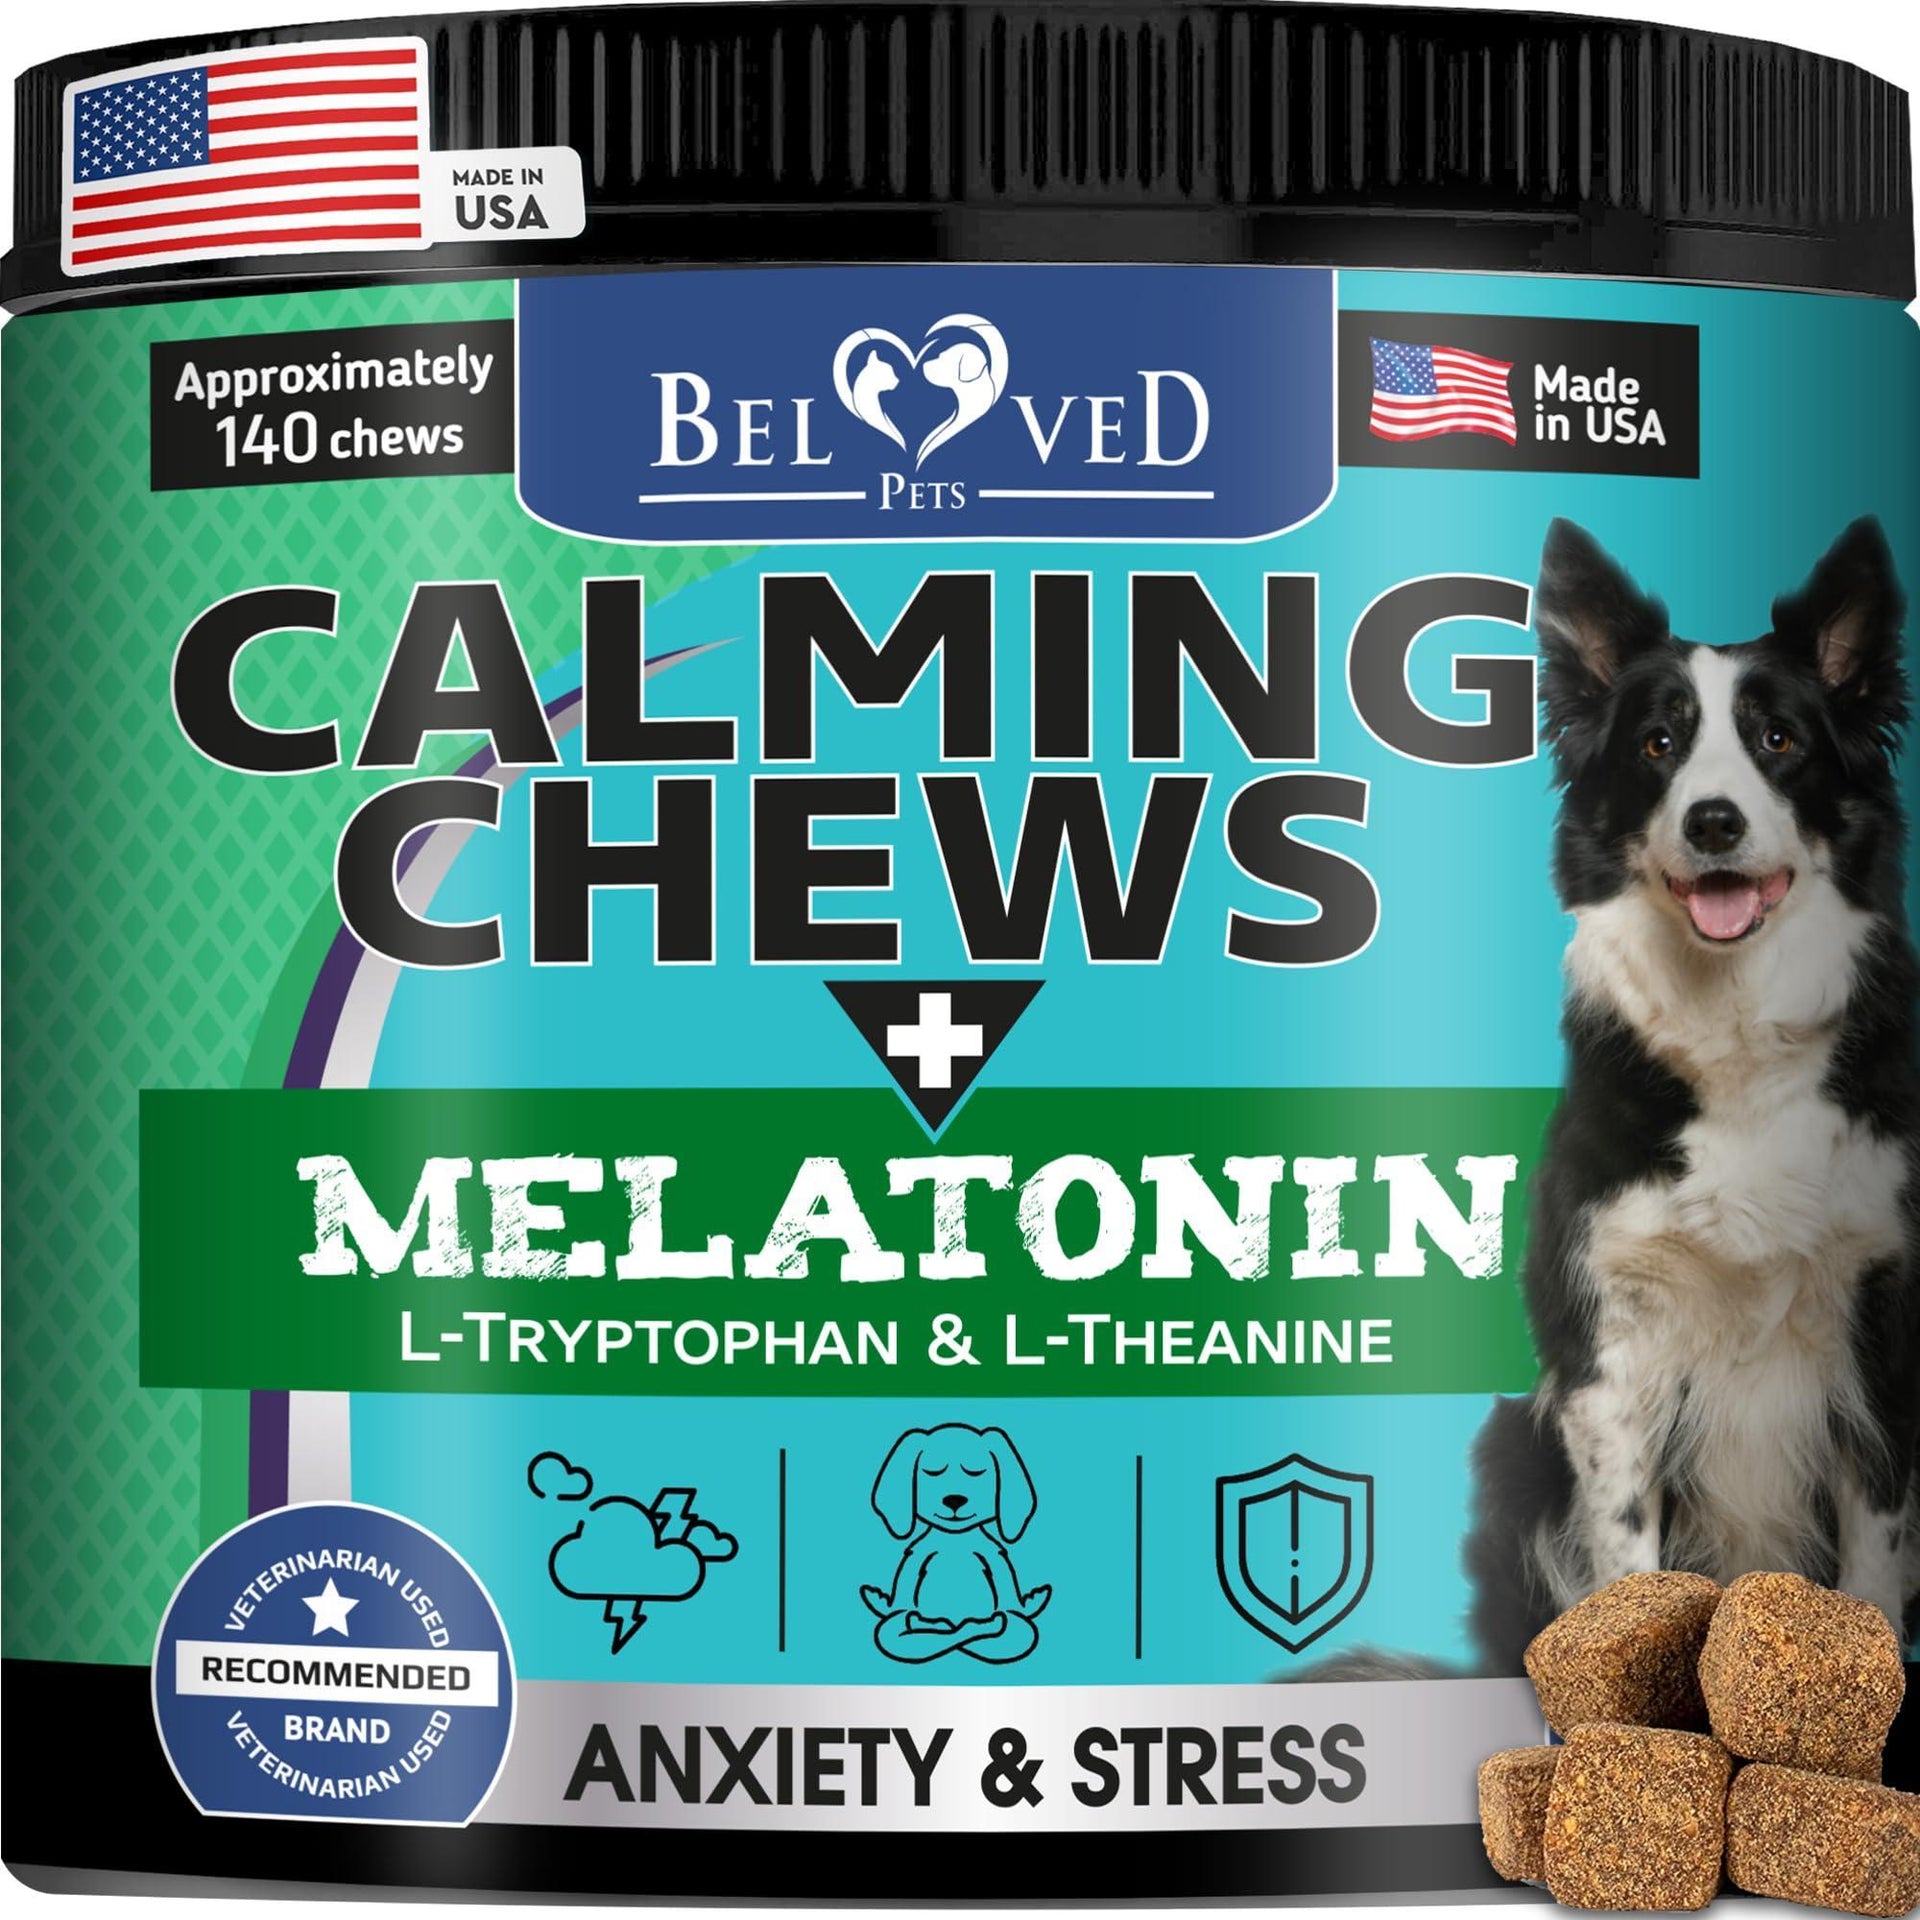 Hemp Calming Chews for Dogs & Puppy Pet Separation Anxiety Relief - Mercantile Mountain